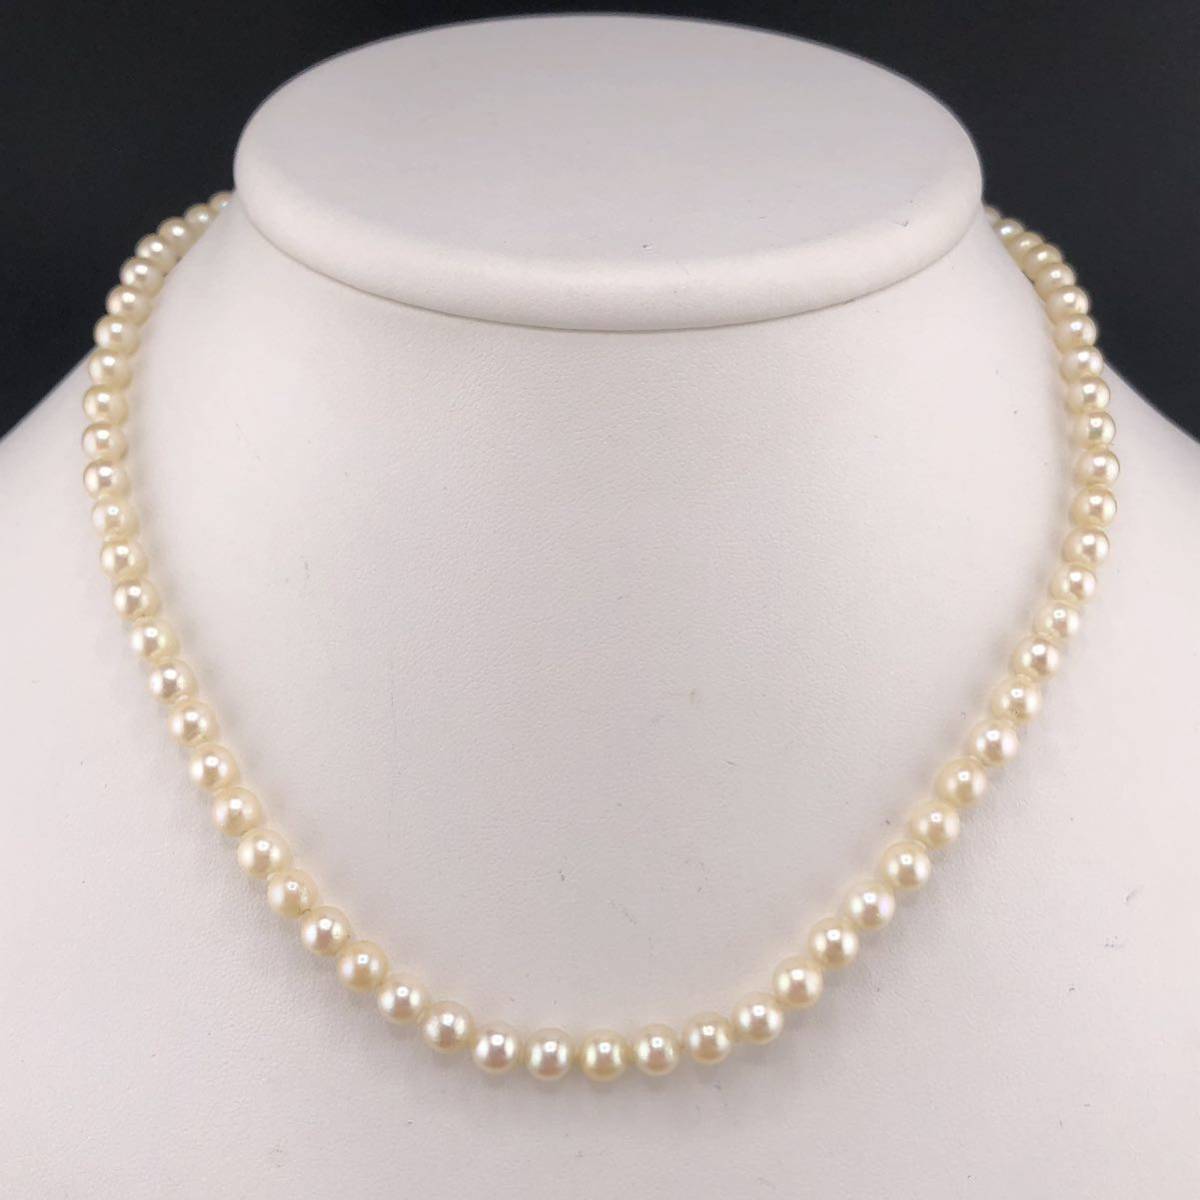 P02-0028 アコヤパールネックレス 5.0mm~5.5mm 40cm 16g ( アコヤ真珠 Pearl necklace SILVER )_画像1